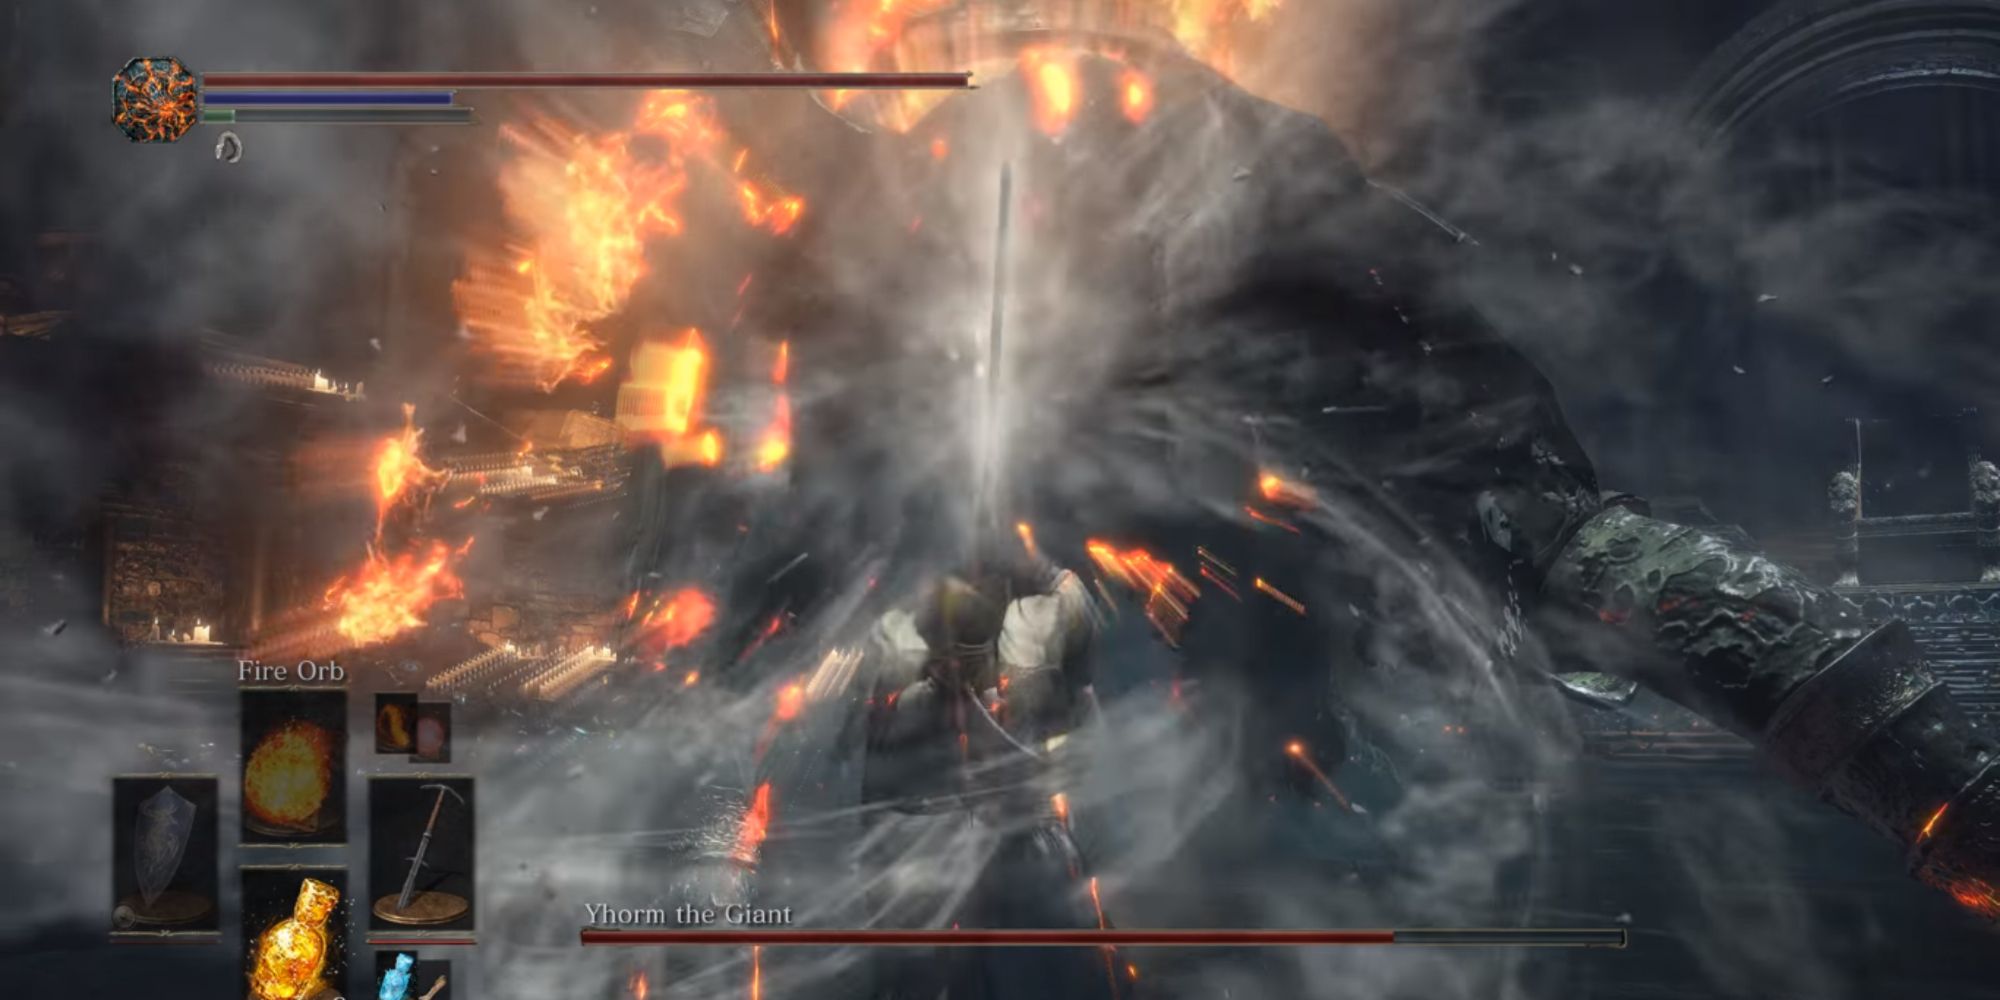 The player using Storm Ruler on the boss.